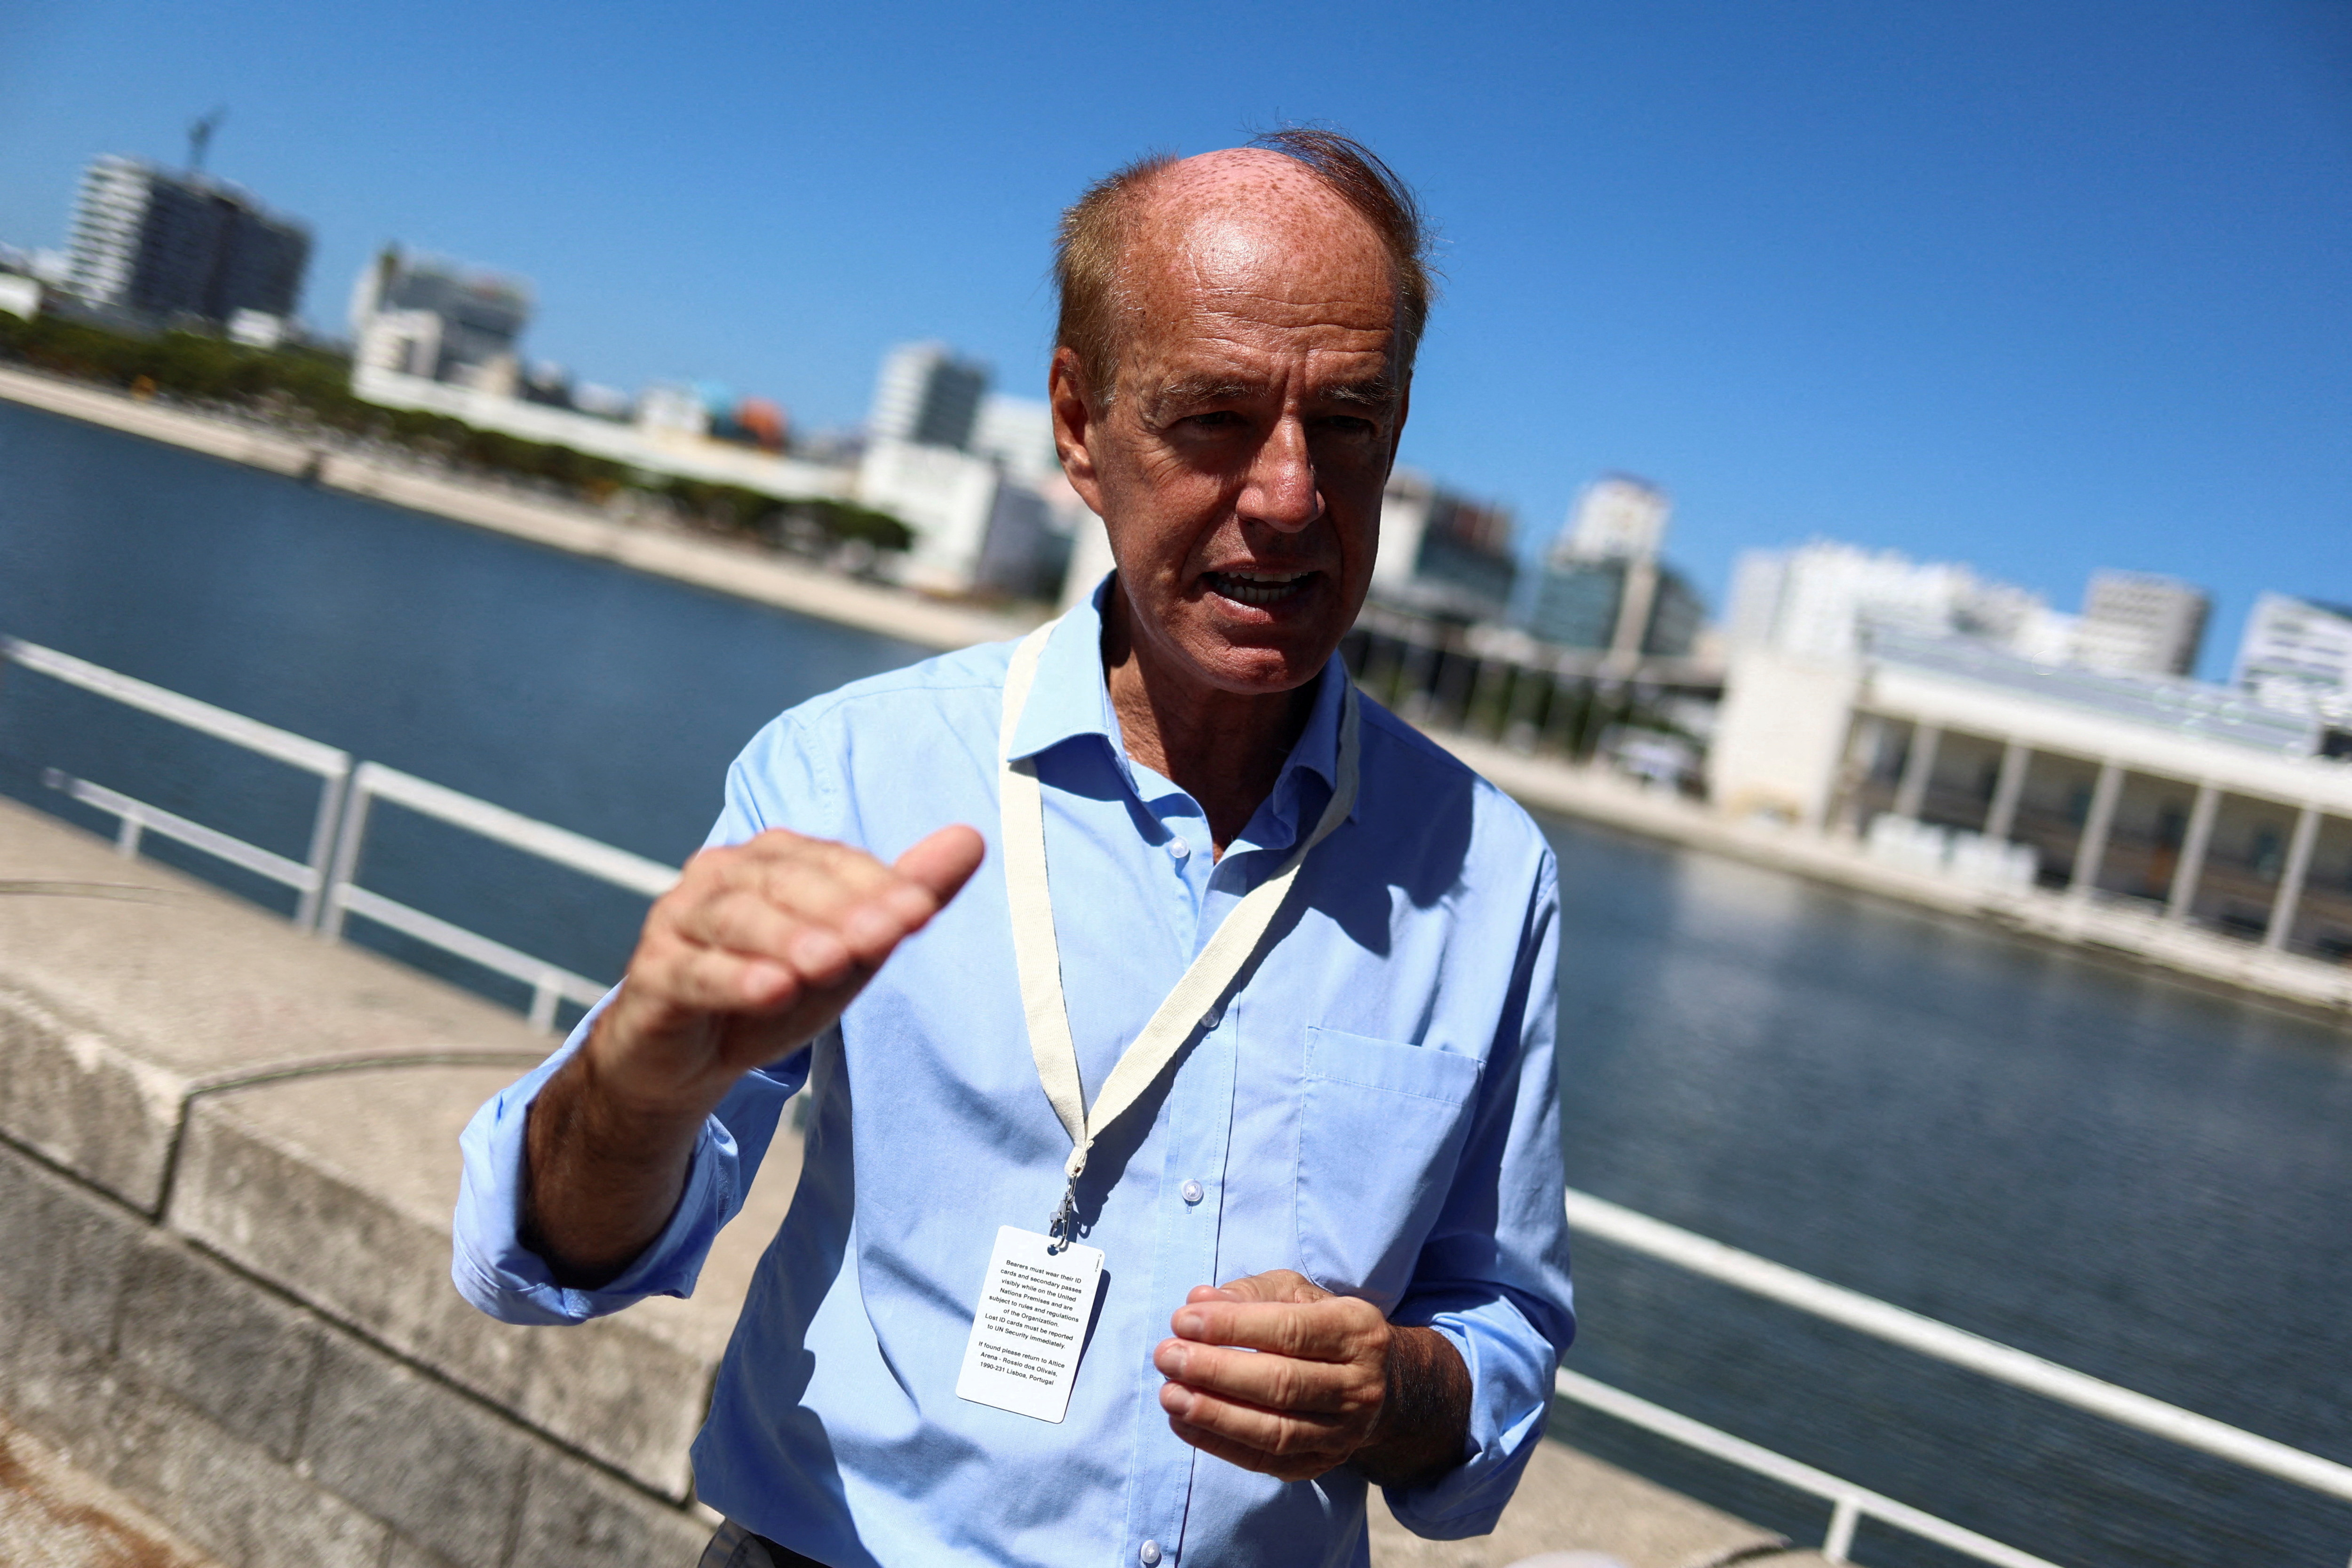 The director general of the World Wildlife Fund, Marco Lambertini, gives an interview to Reuters at the United Nations Ocean Conference in Lisbon